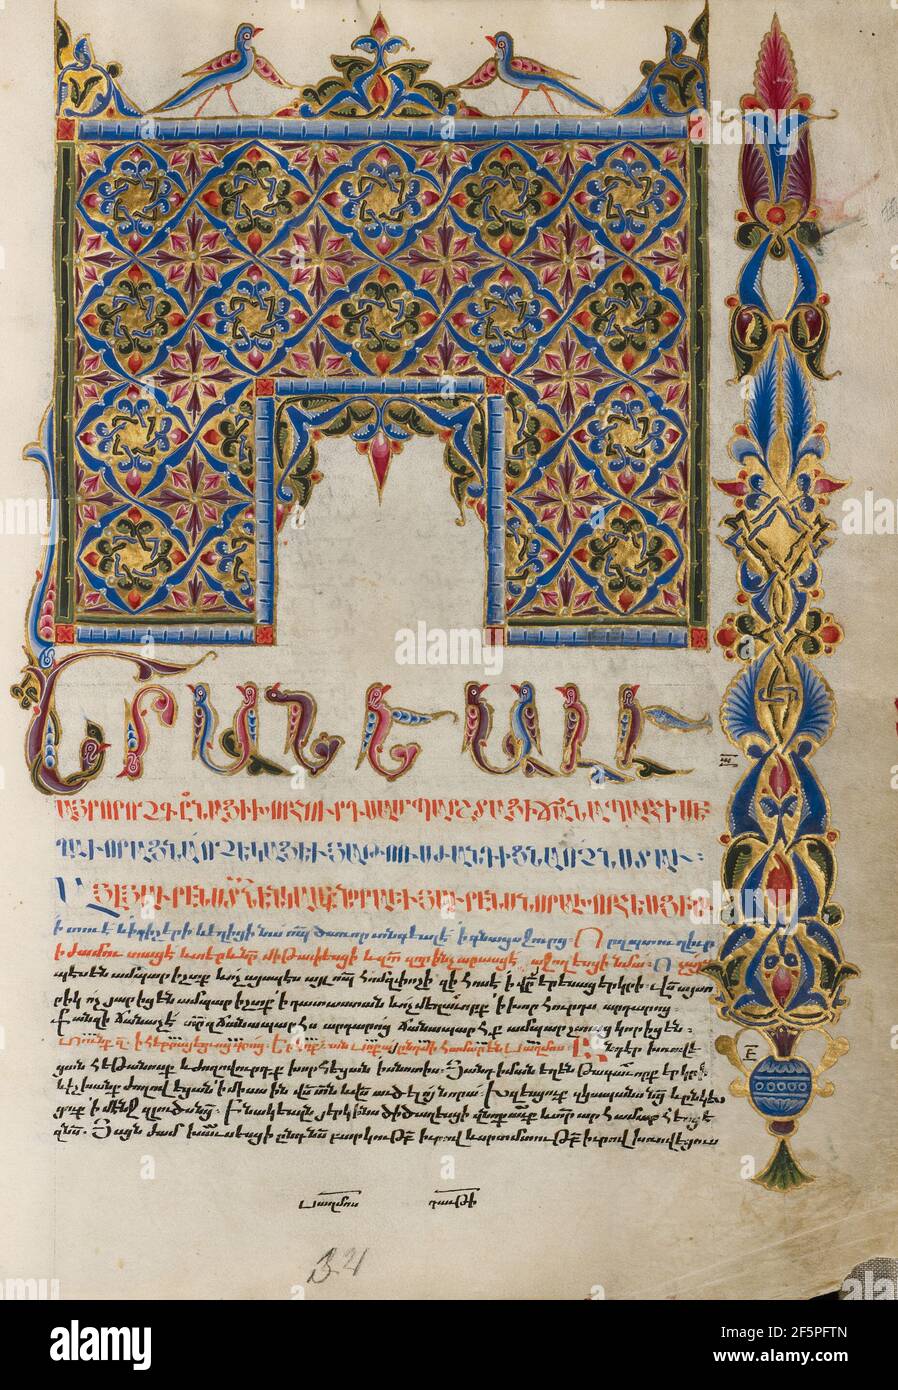 Decorated Incipit Page. Stock Photo